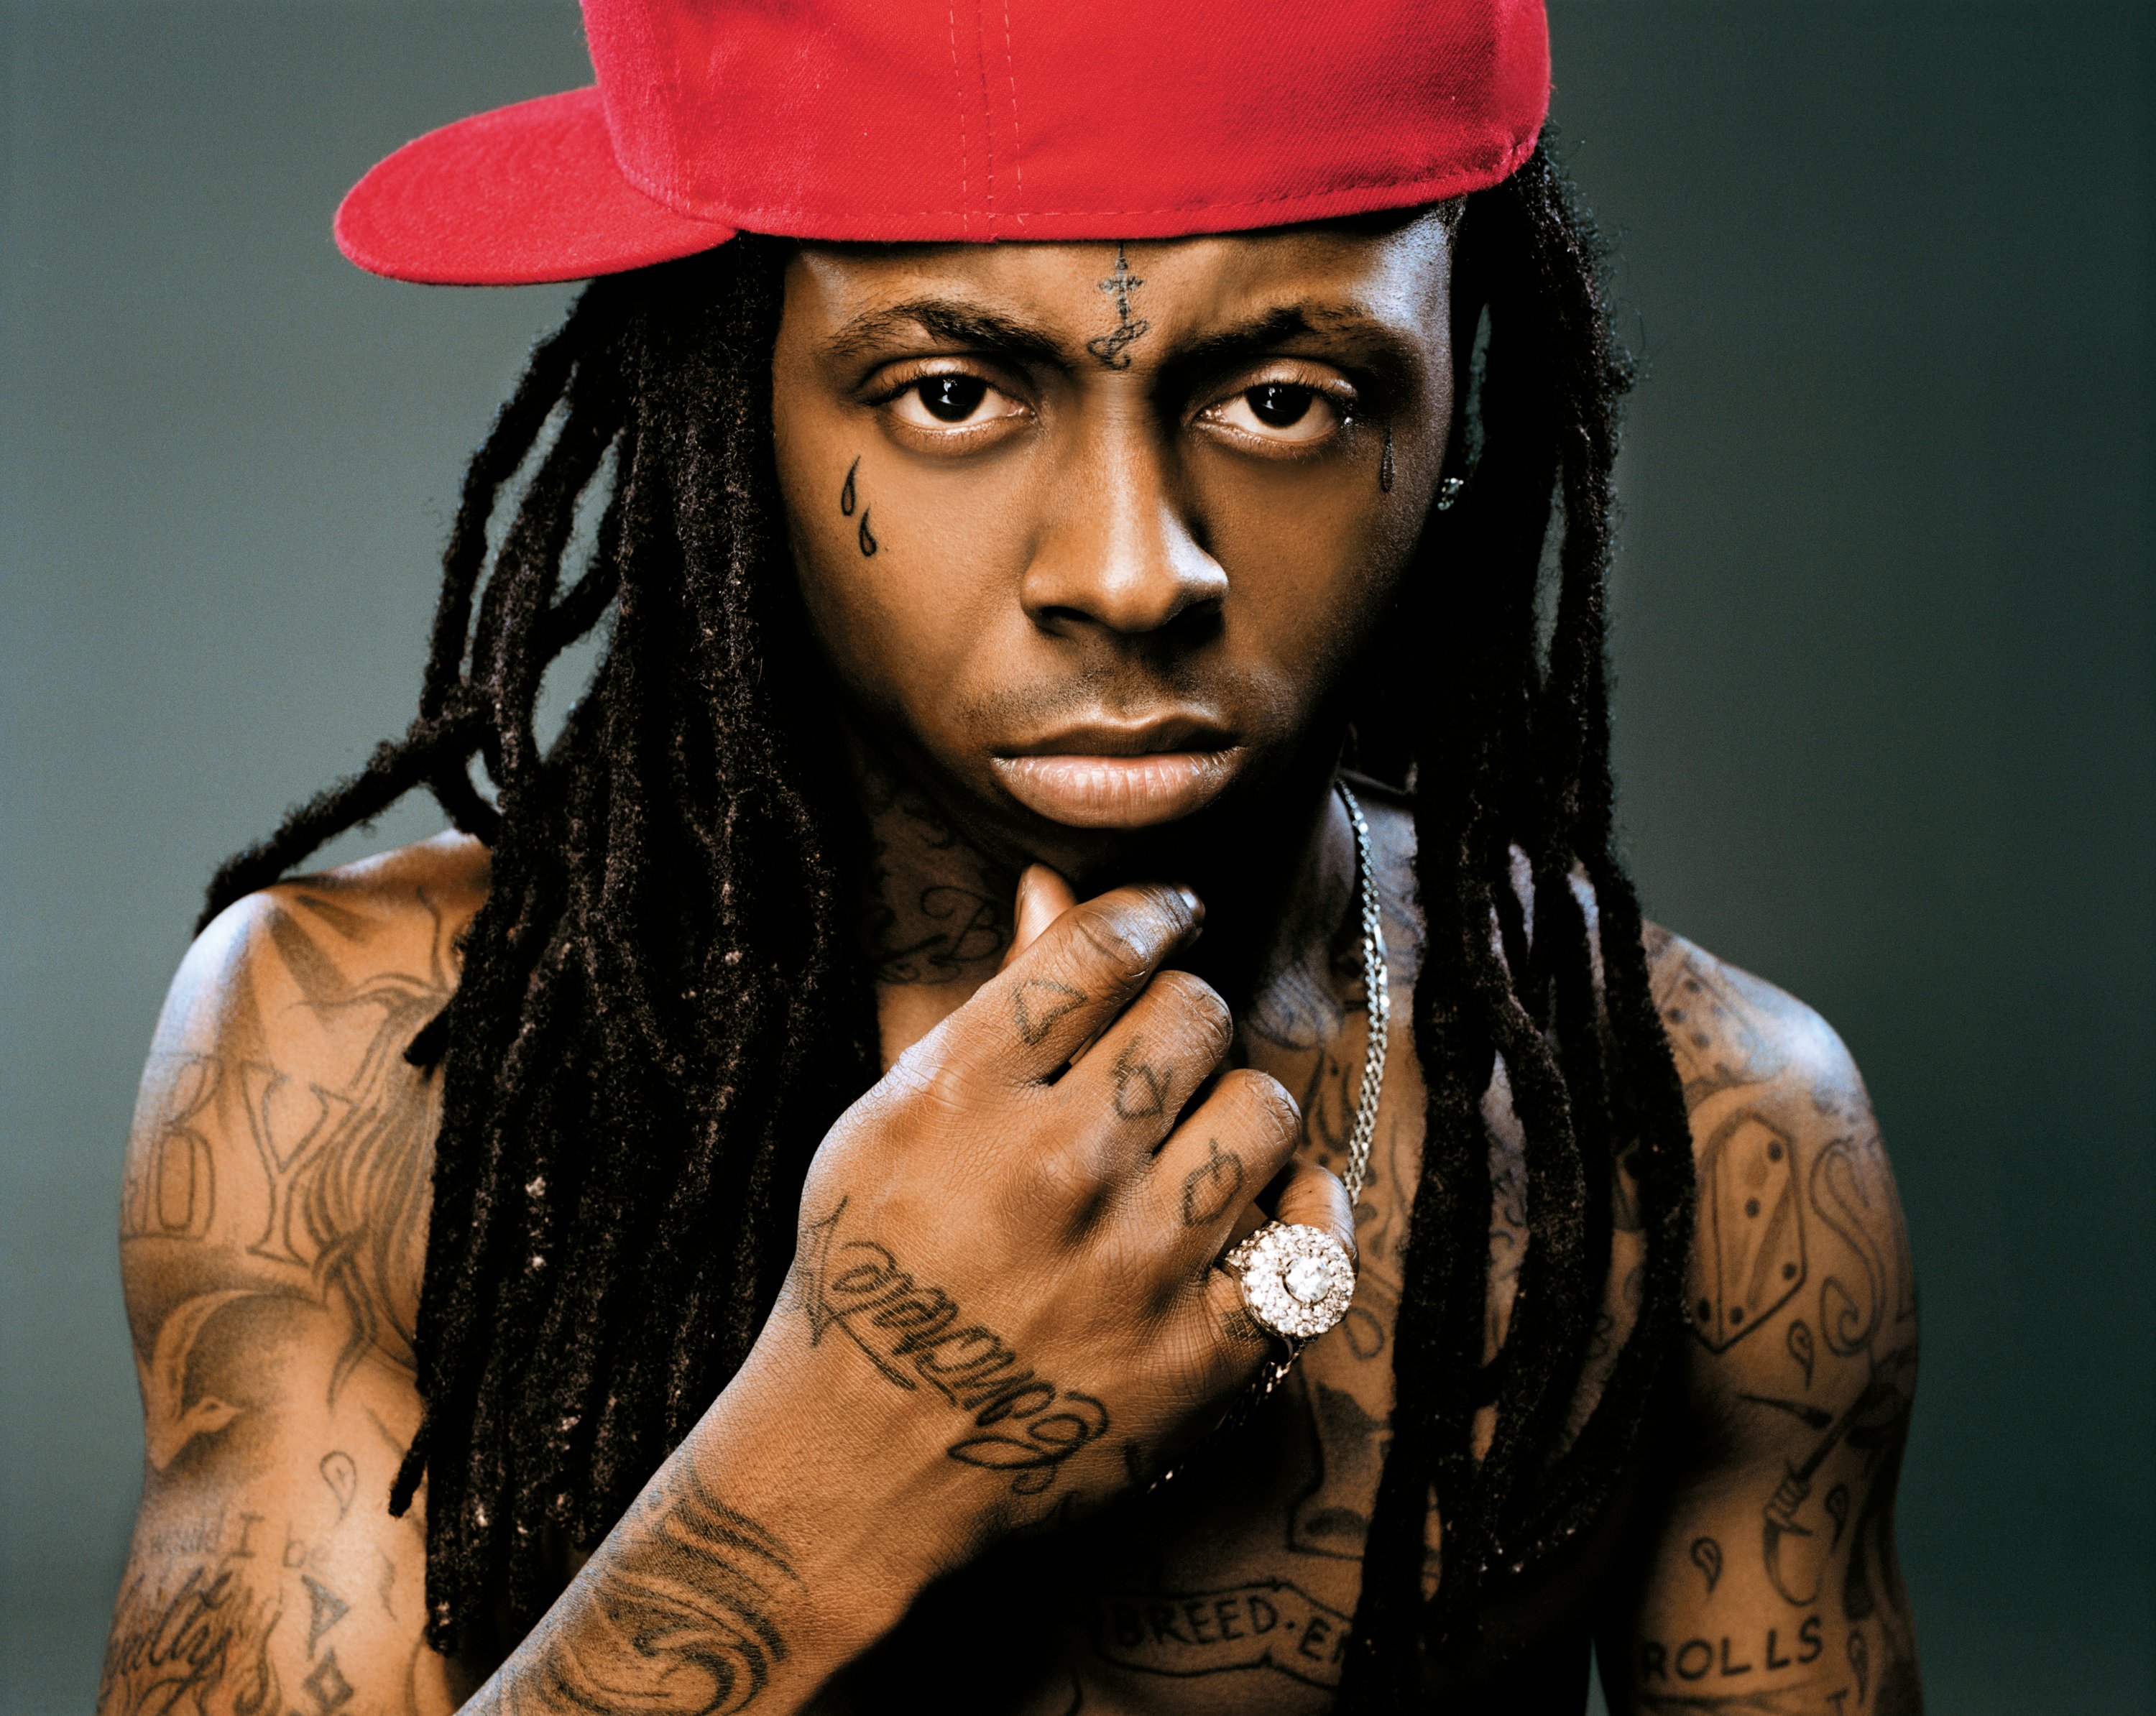 Lil Wayne Wallpapers HDHD Wallpapers 3000x2388